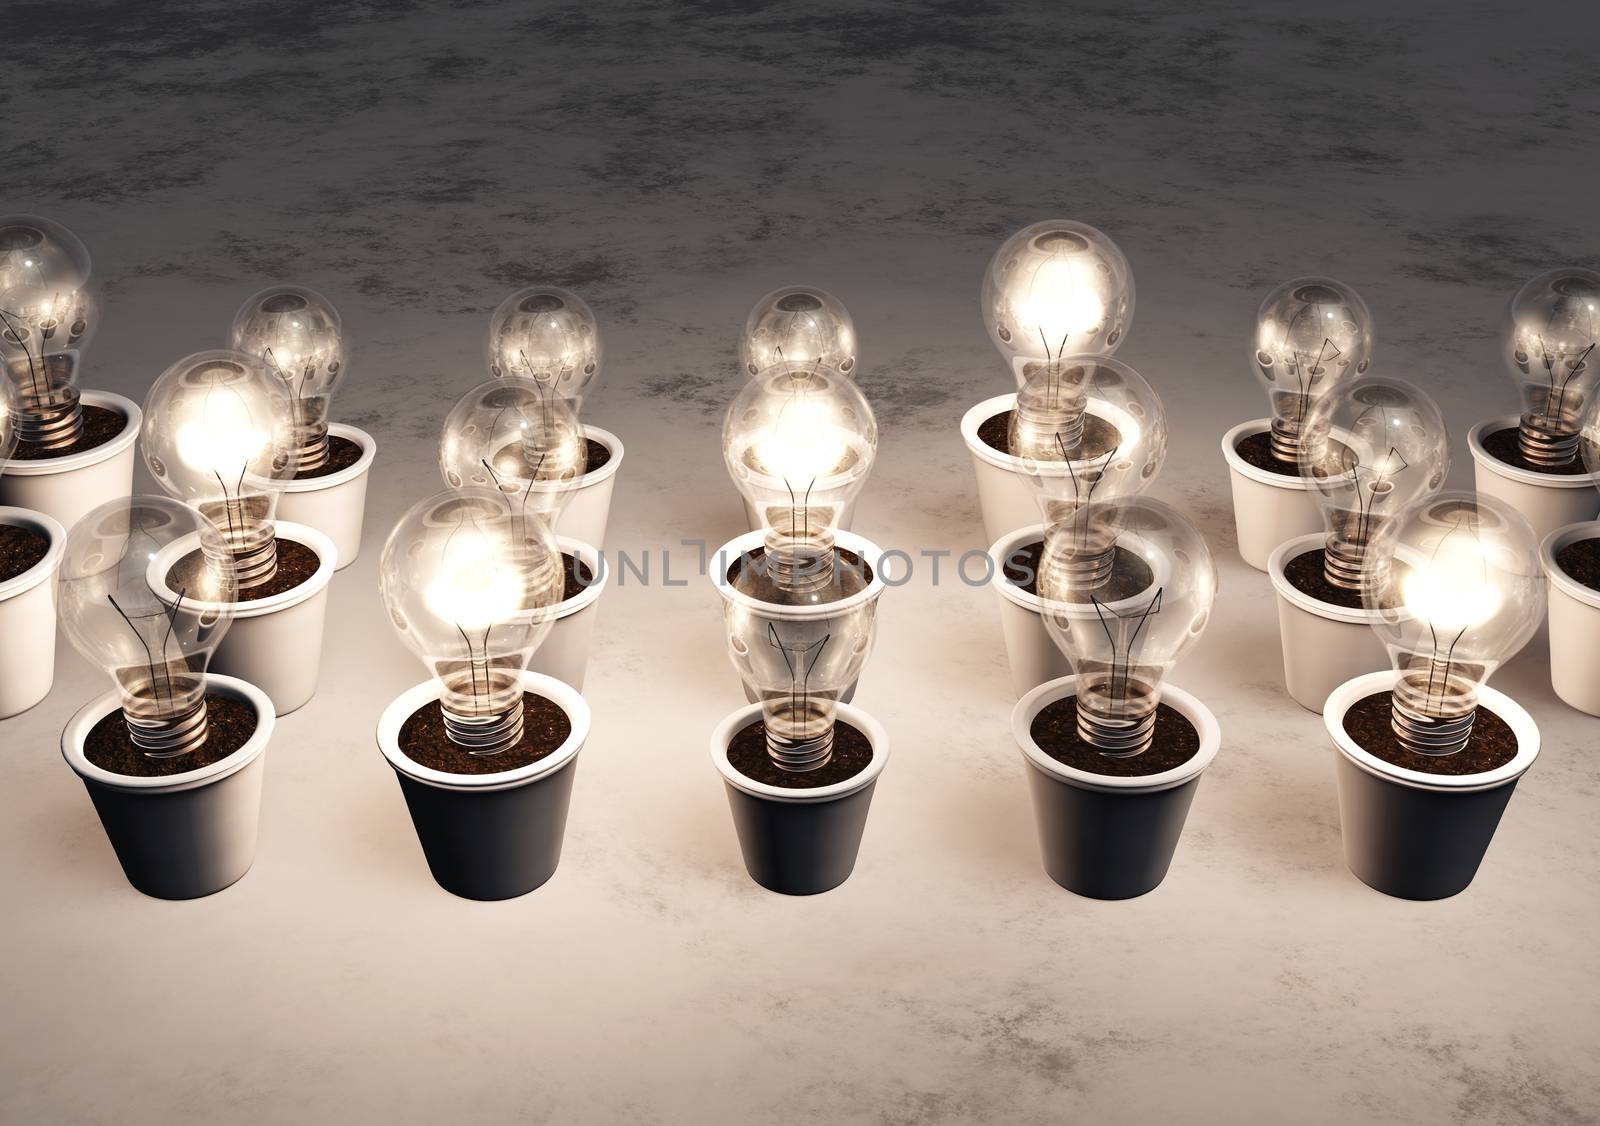 rows of light bulbs with different sizes in white pots lie on a white and gray abstract ground, some light bulbs are lit randomly with a white light